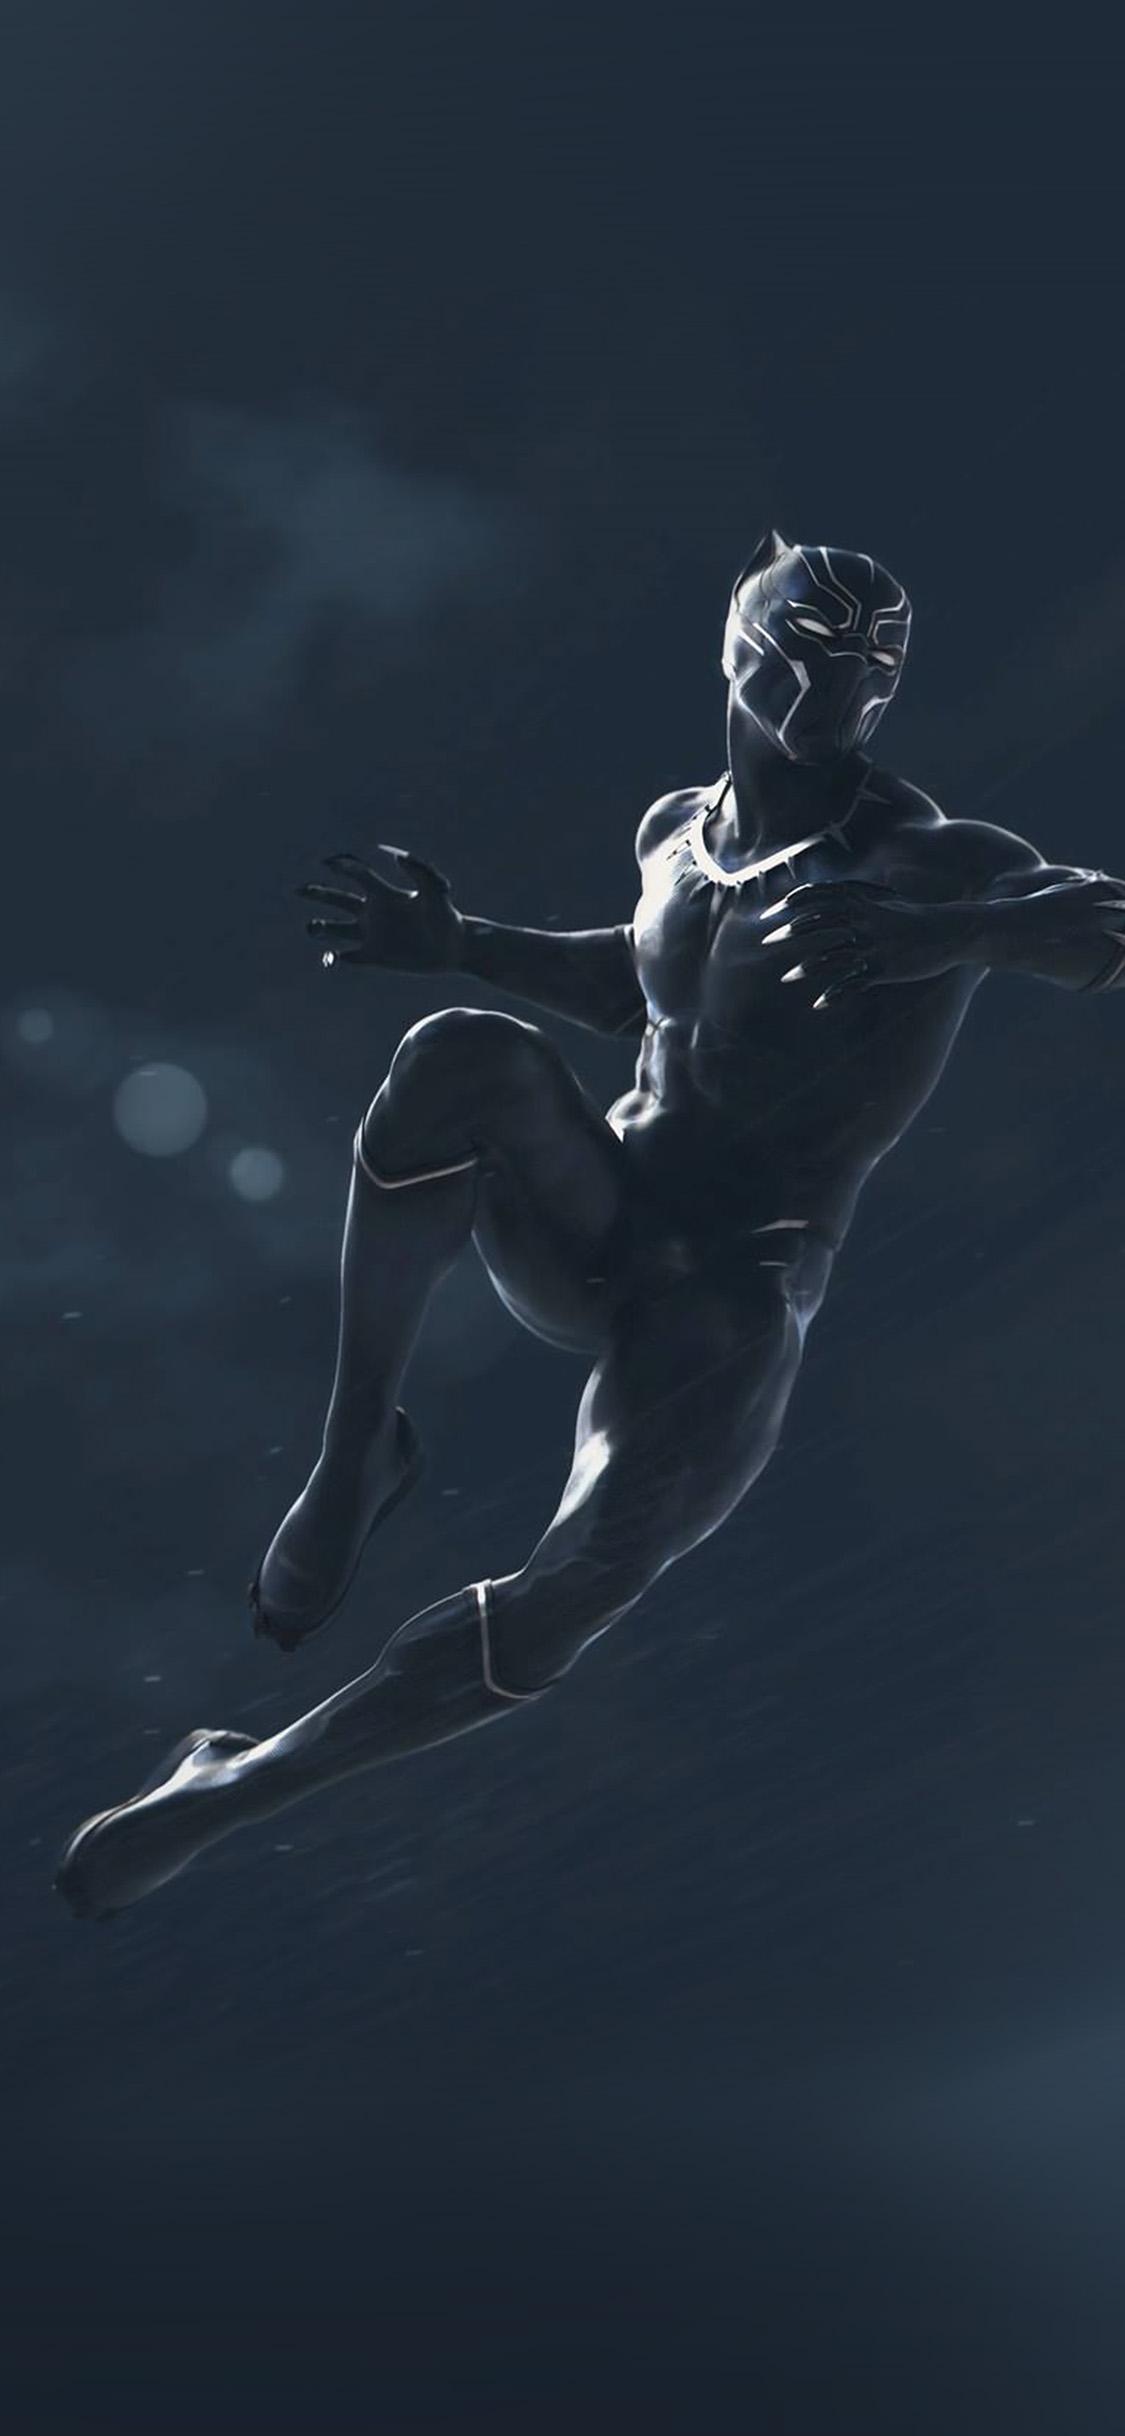 iPhone wallpaper. marvel blackpanther